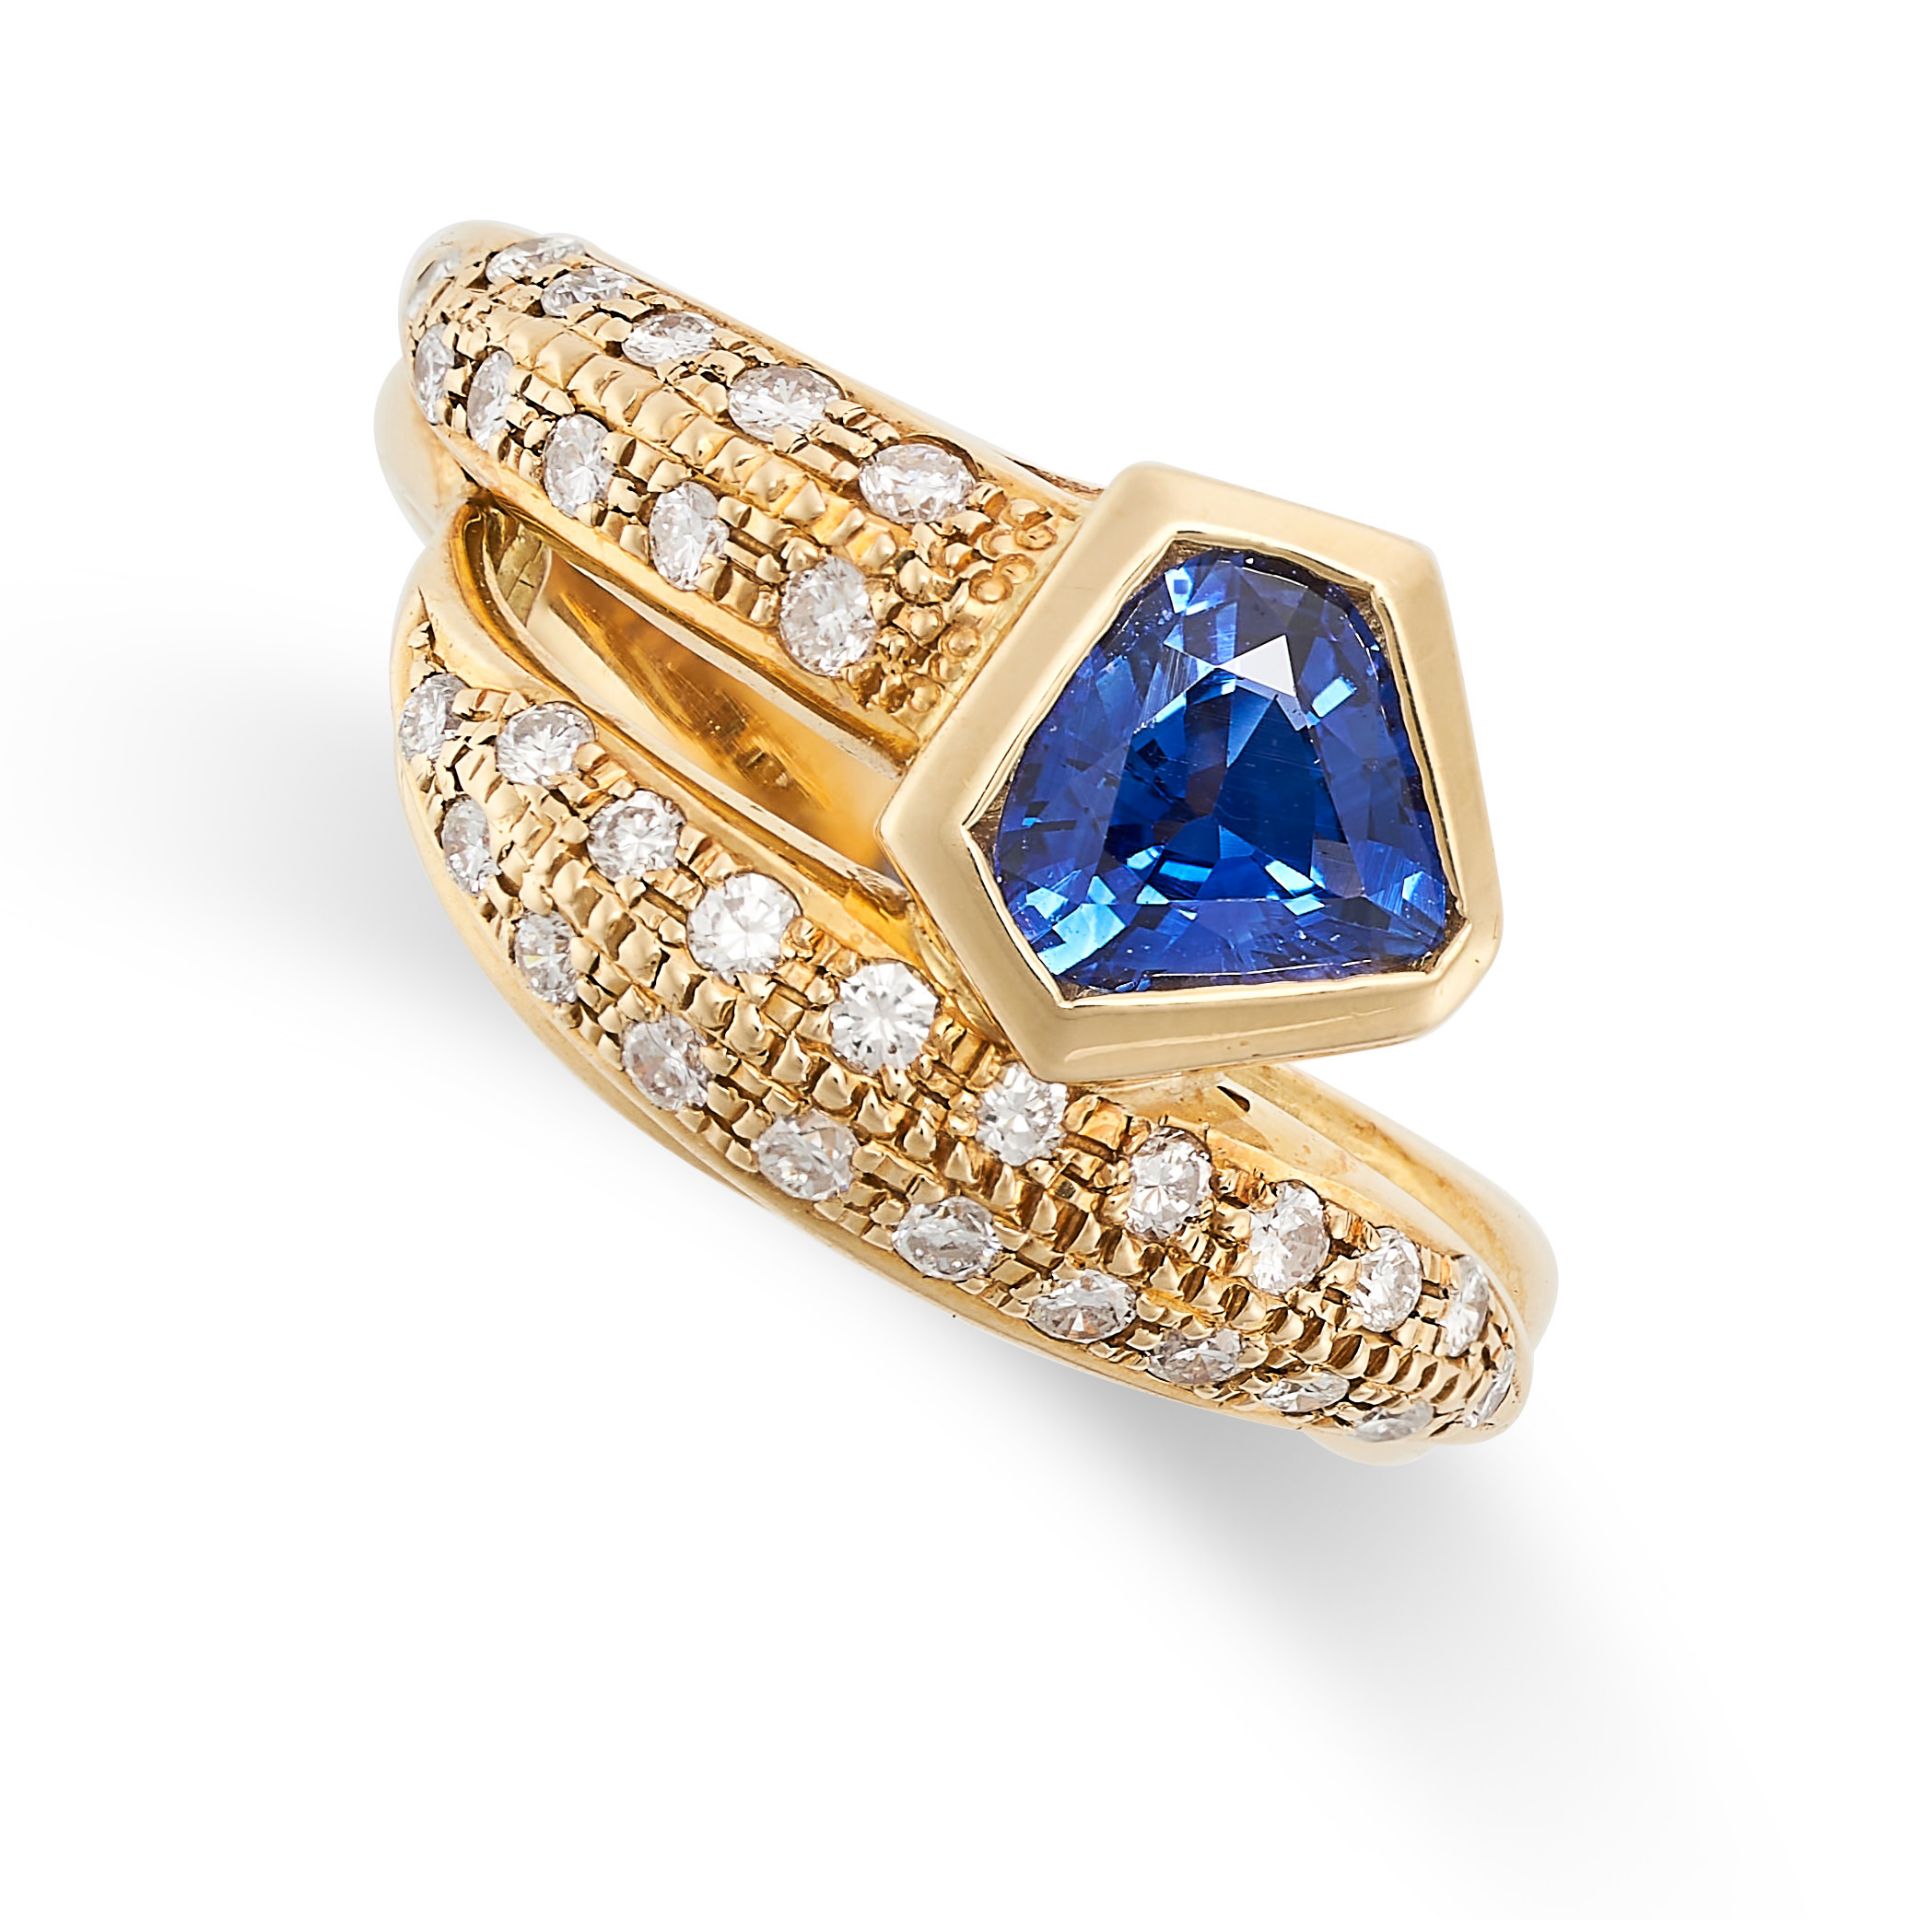 A SAPPHIRE AND DIAMOND CROSSOVER RING in 18ct yellow gold, set with a shield shaped sapphire of 0.76